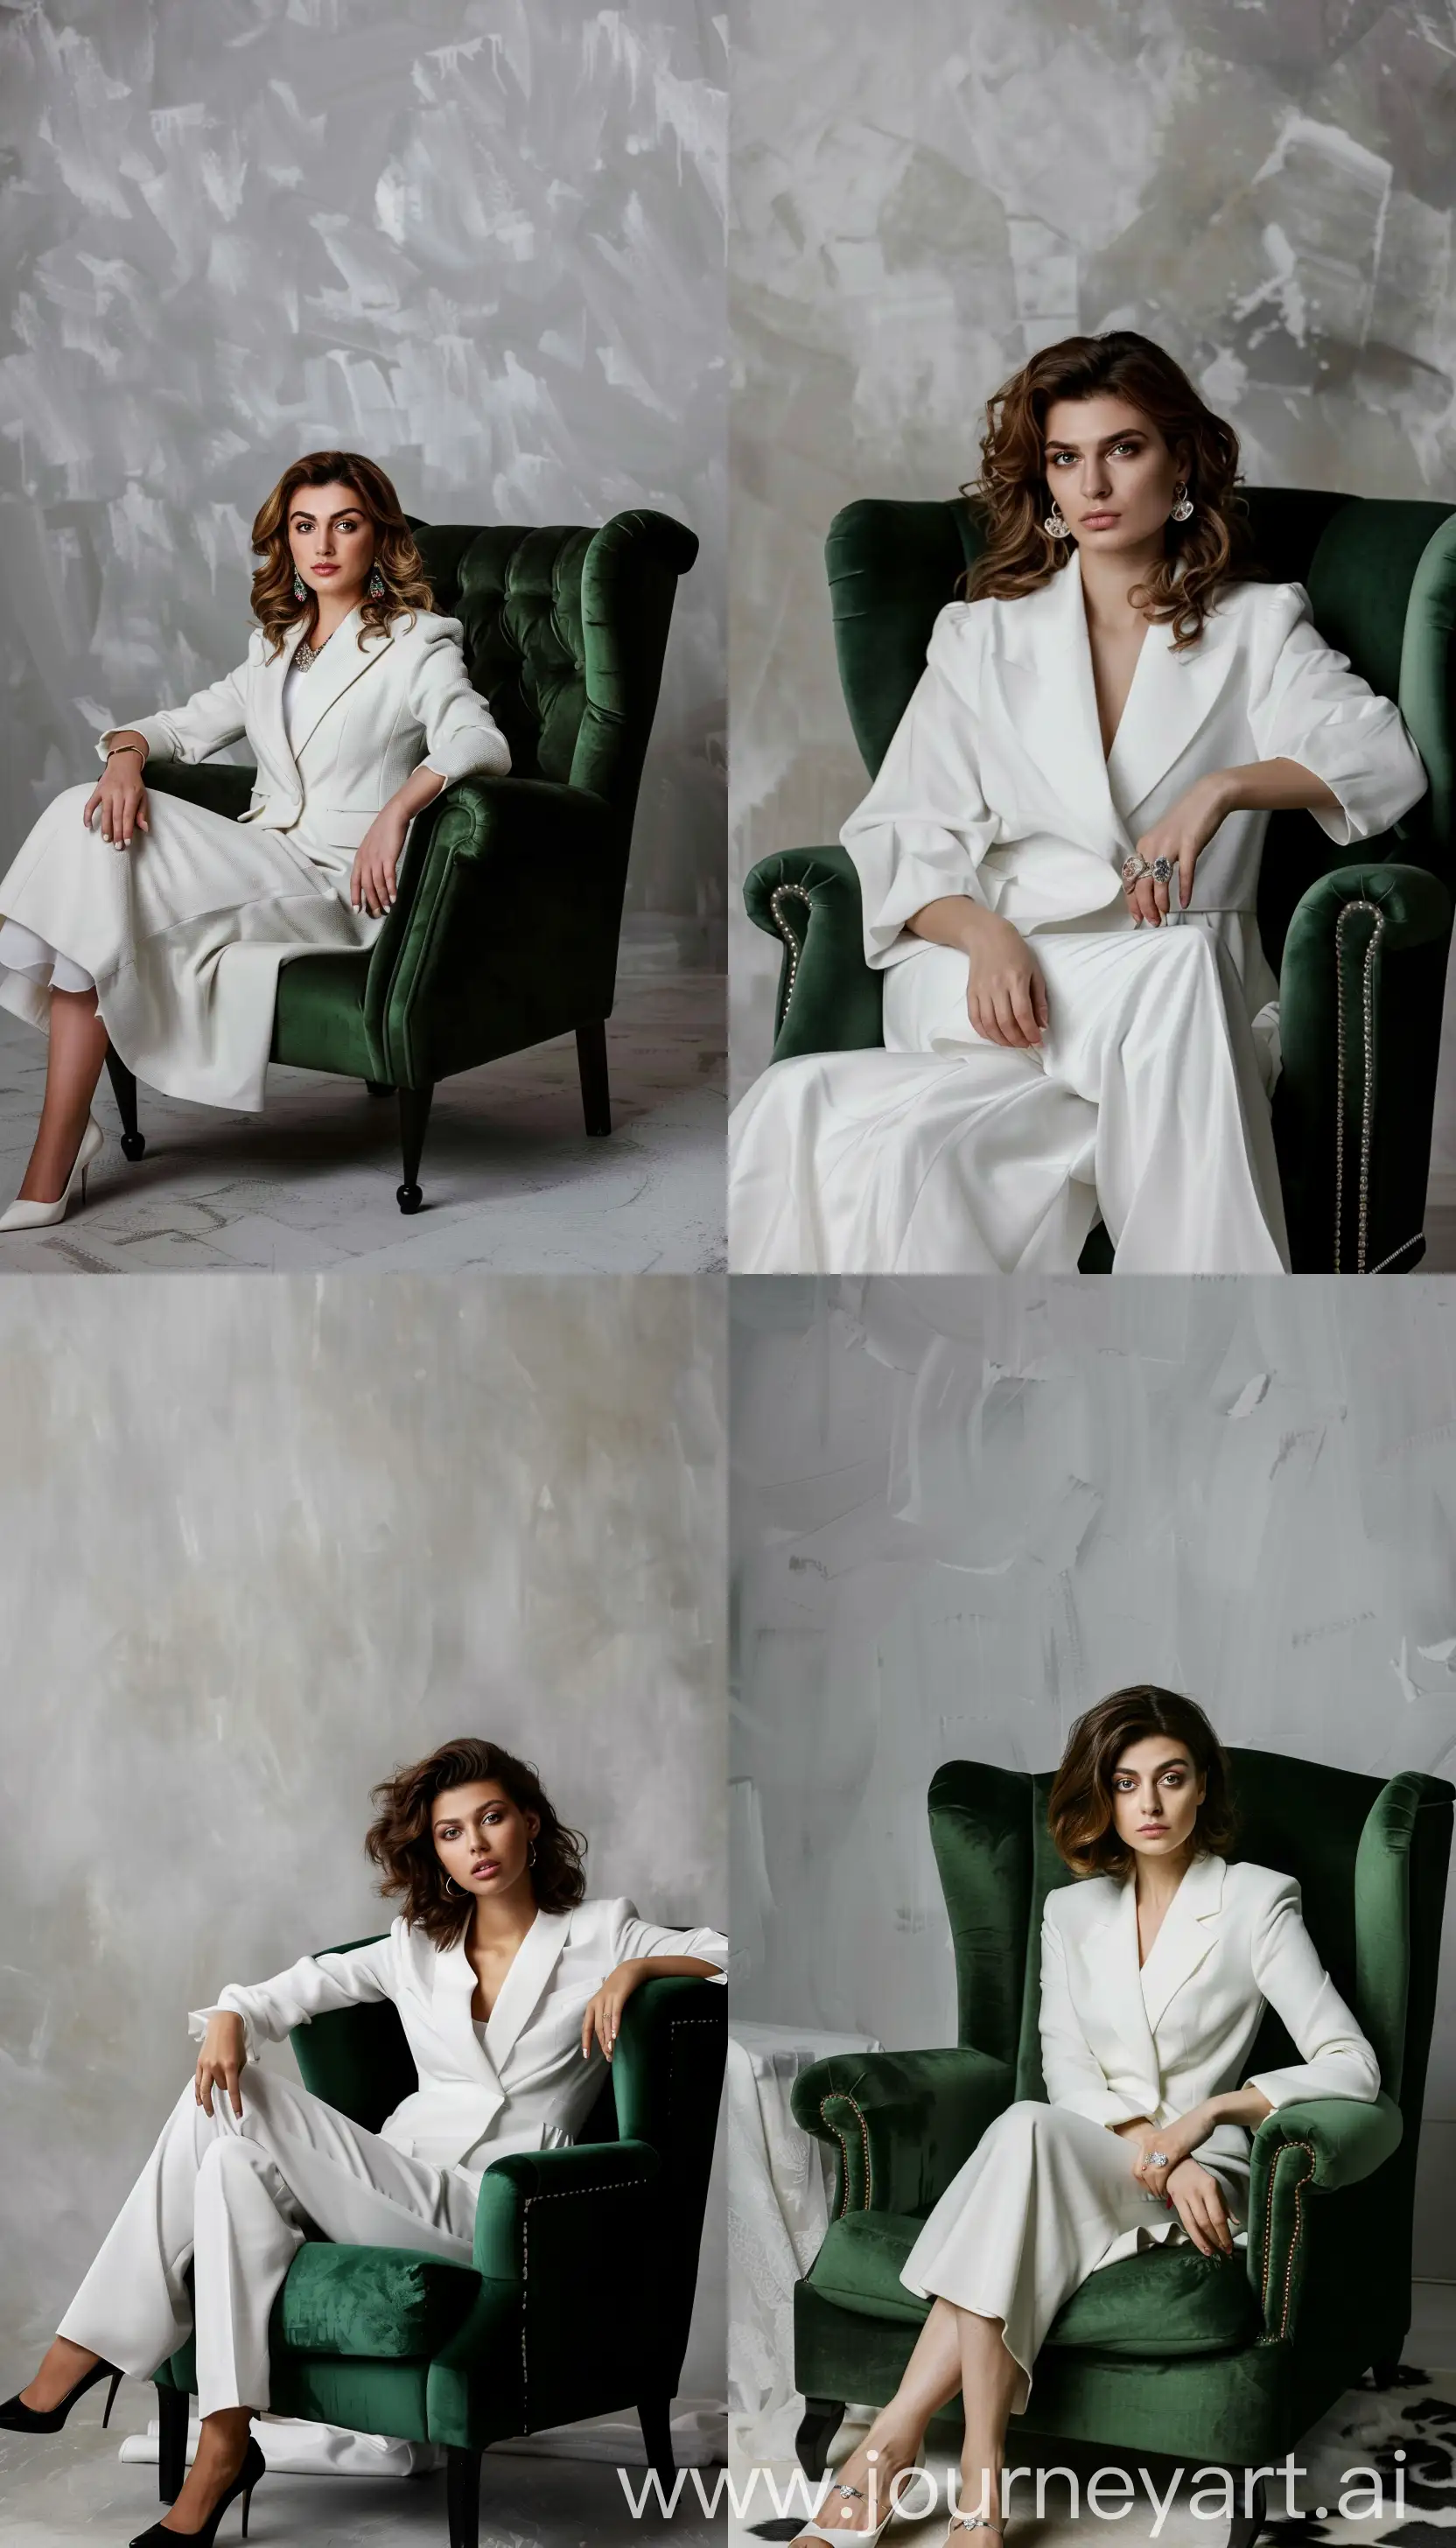 A zoom out of an elegant woman dressed in white, seated in a stylish green armchair, studio photograph, white background, olive skin tone, studio lighting —sref https://i.pinimg.com/564x/8a/a0/16/8aa01689414ea735353f8e60ffb9b00a.jpg —v 6 —style raw —ar 4:7